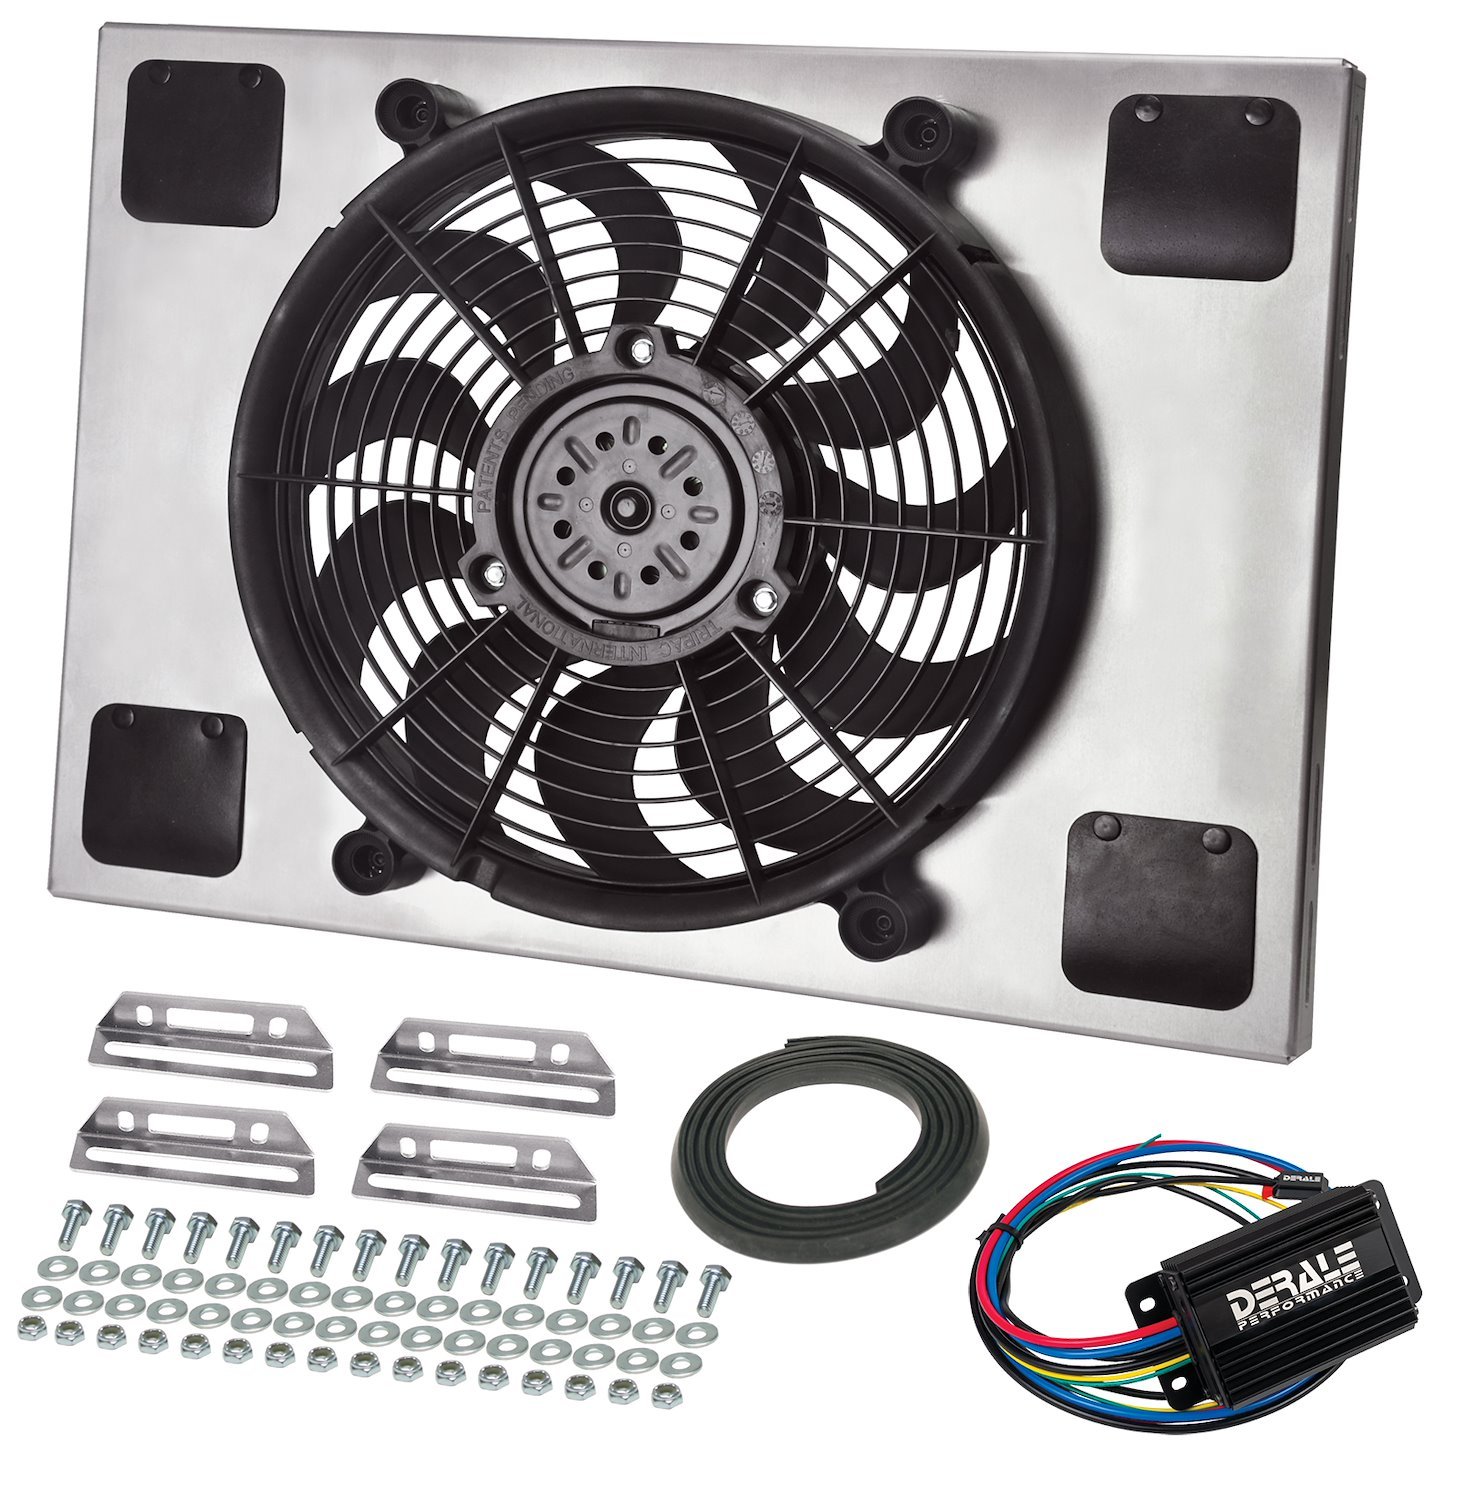 Multi-Speed Puller Fan With PWM Controller In Aluminum Shroud Universal Fit